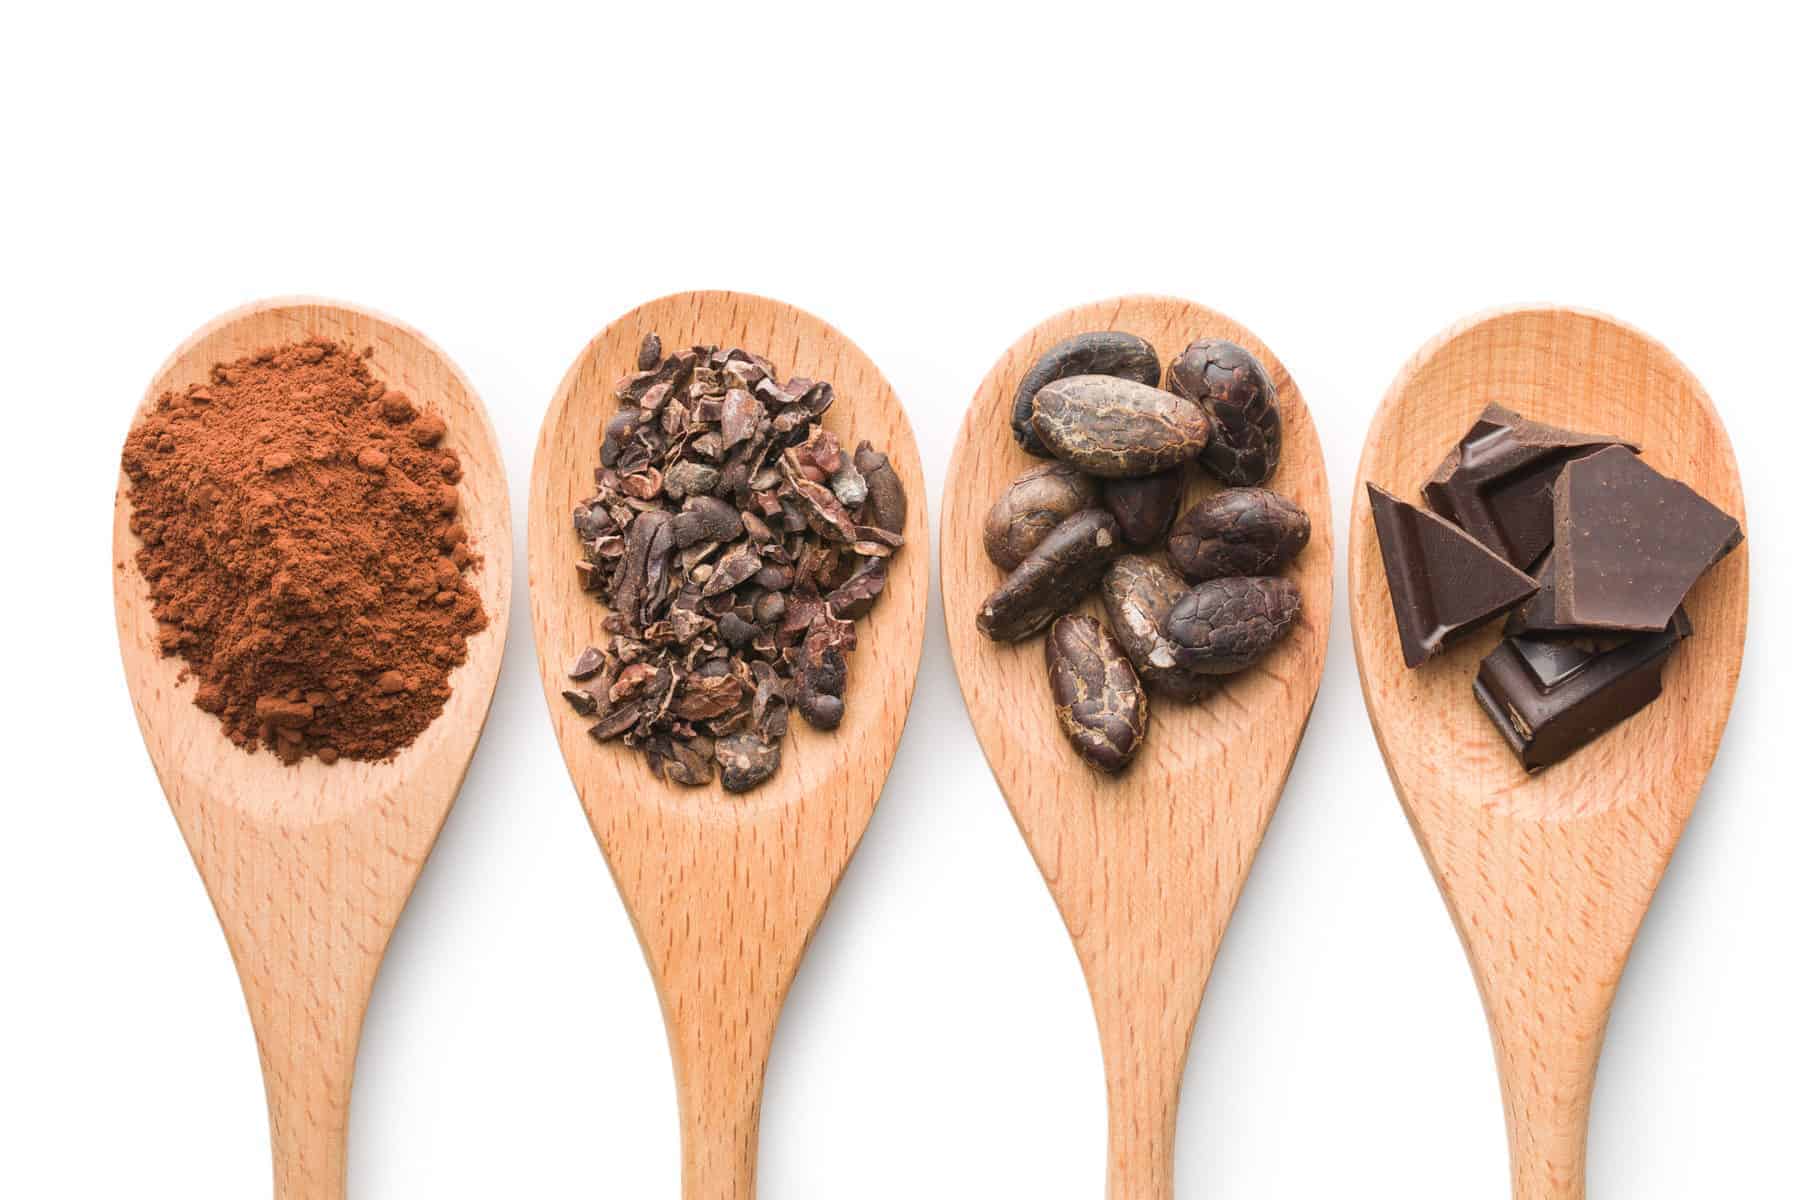 cocoa powder, cacao nibs, cacao beans, and solid chocolate each on wooden spoons in a row